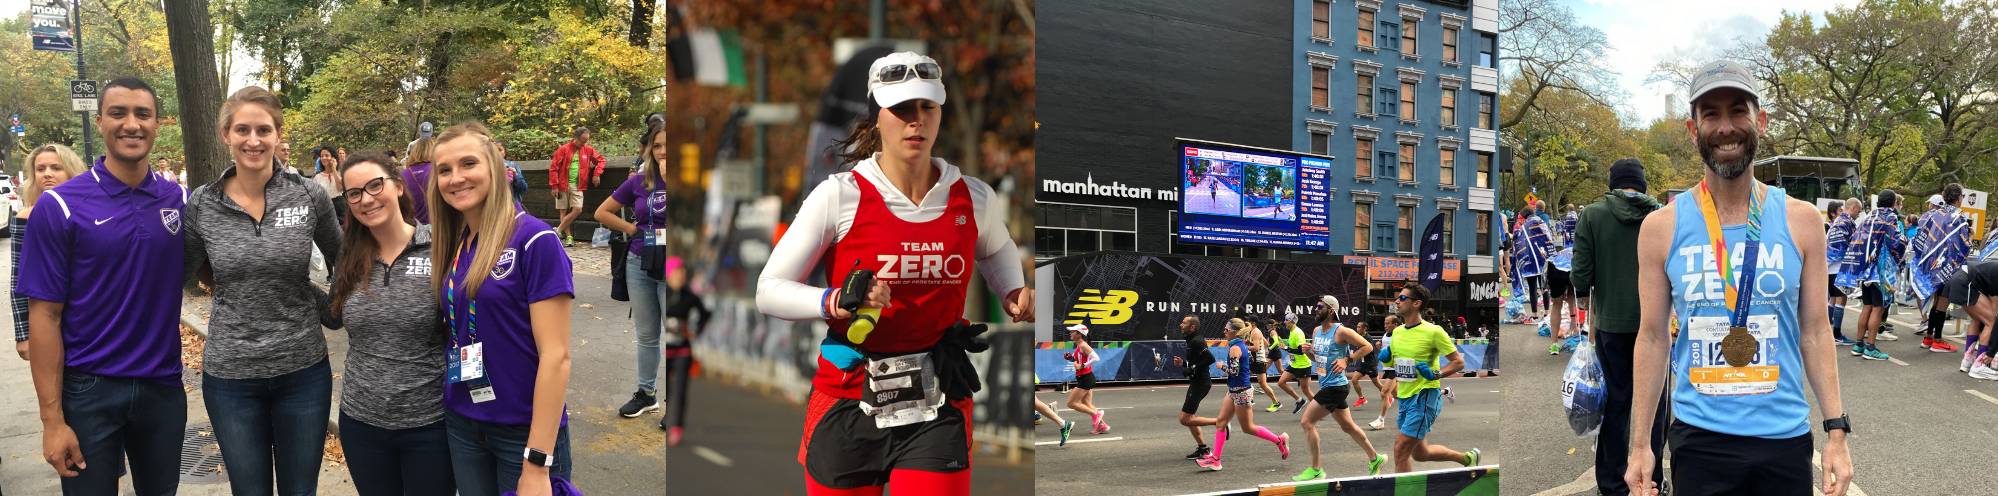 Collage NYC Marathon for Greeting Page